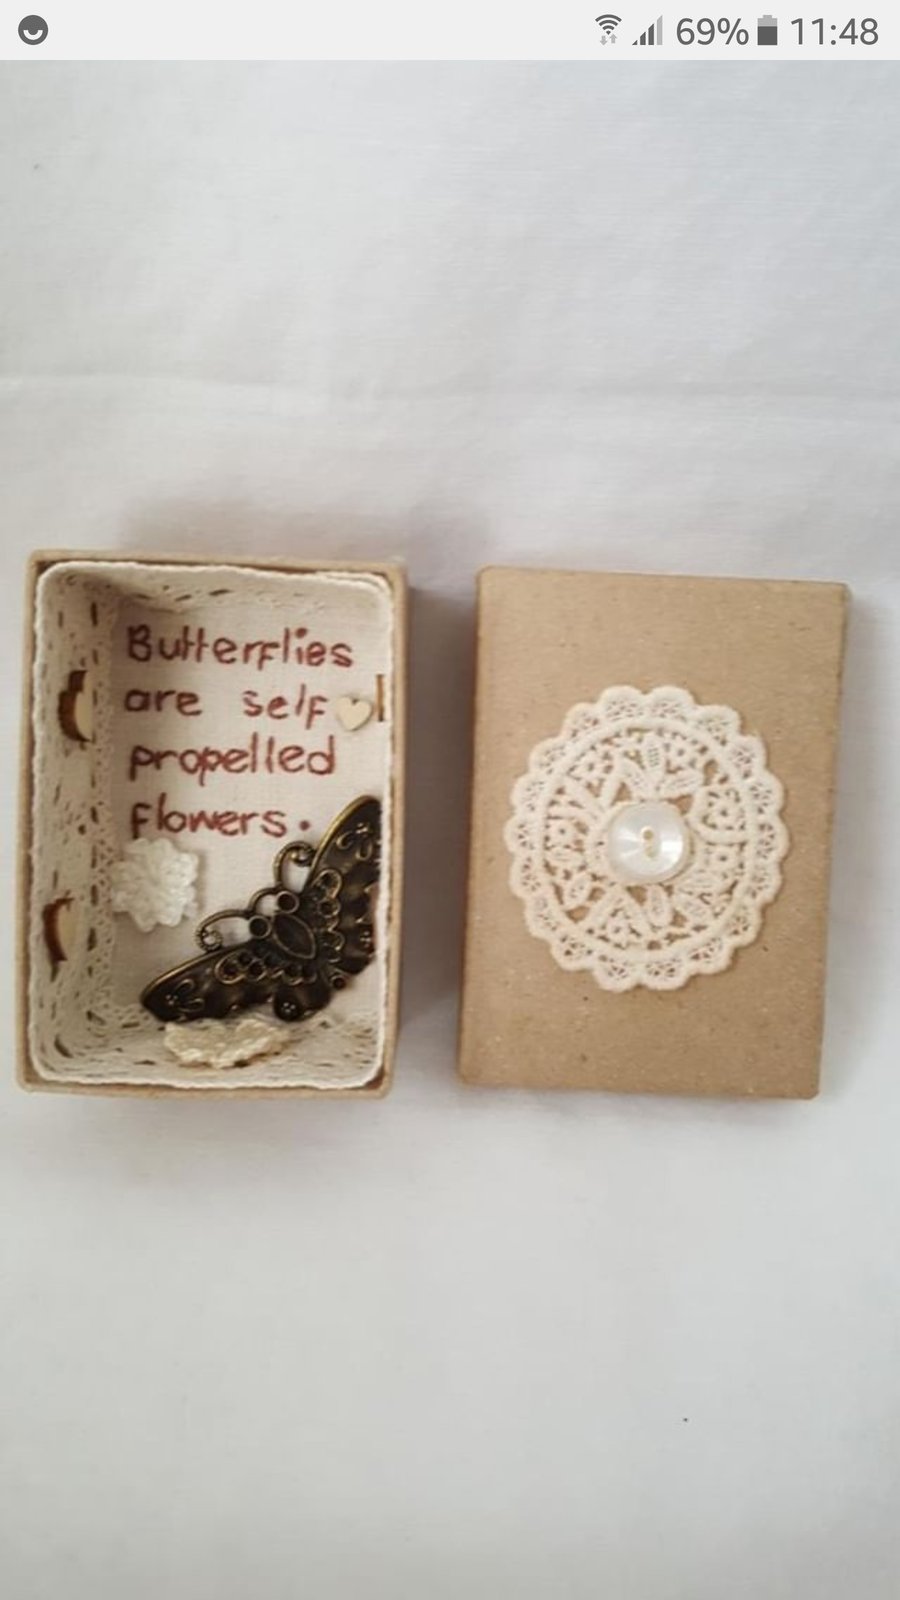 small miniature art diorama with a message 'butterflies are self propelled......